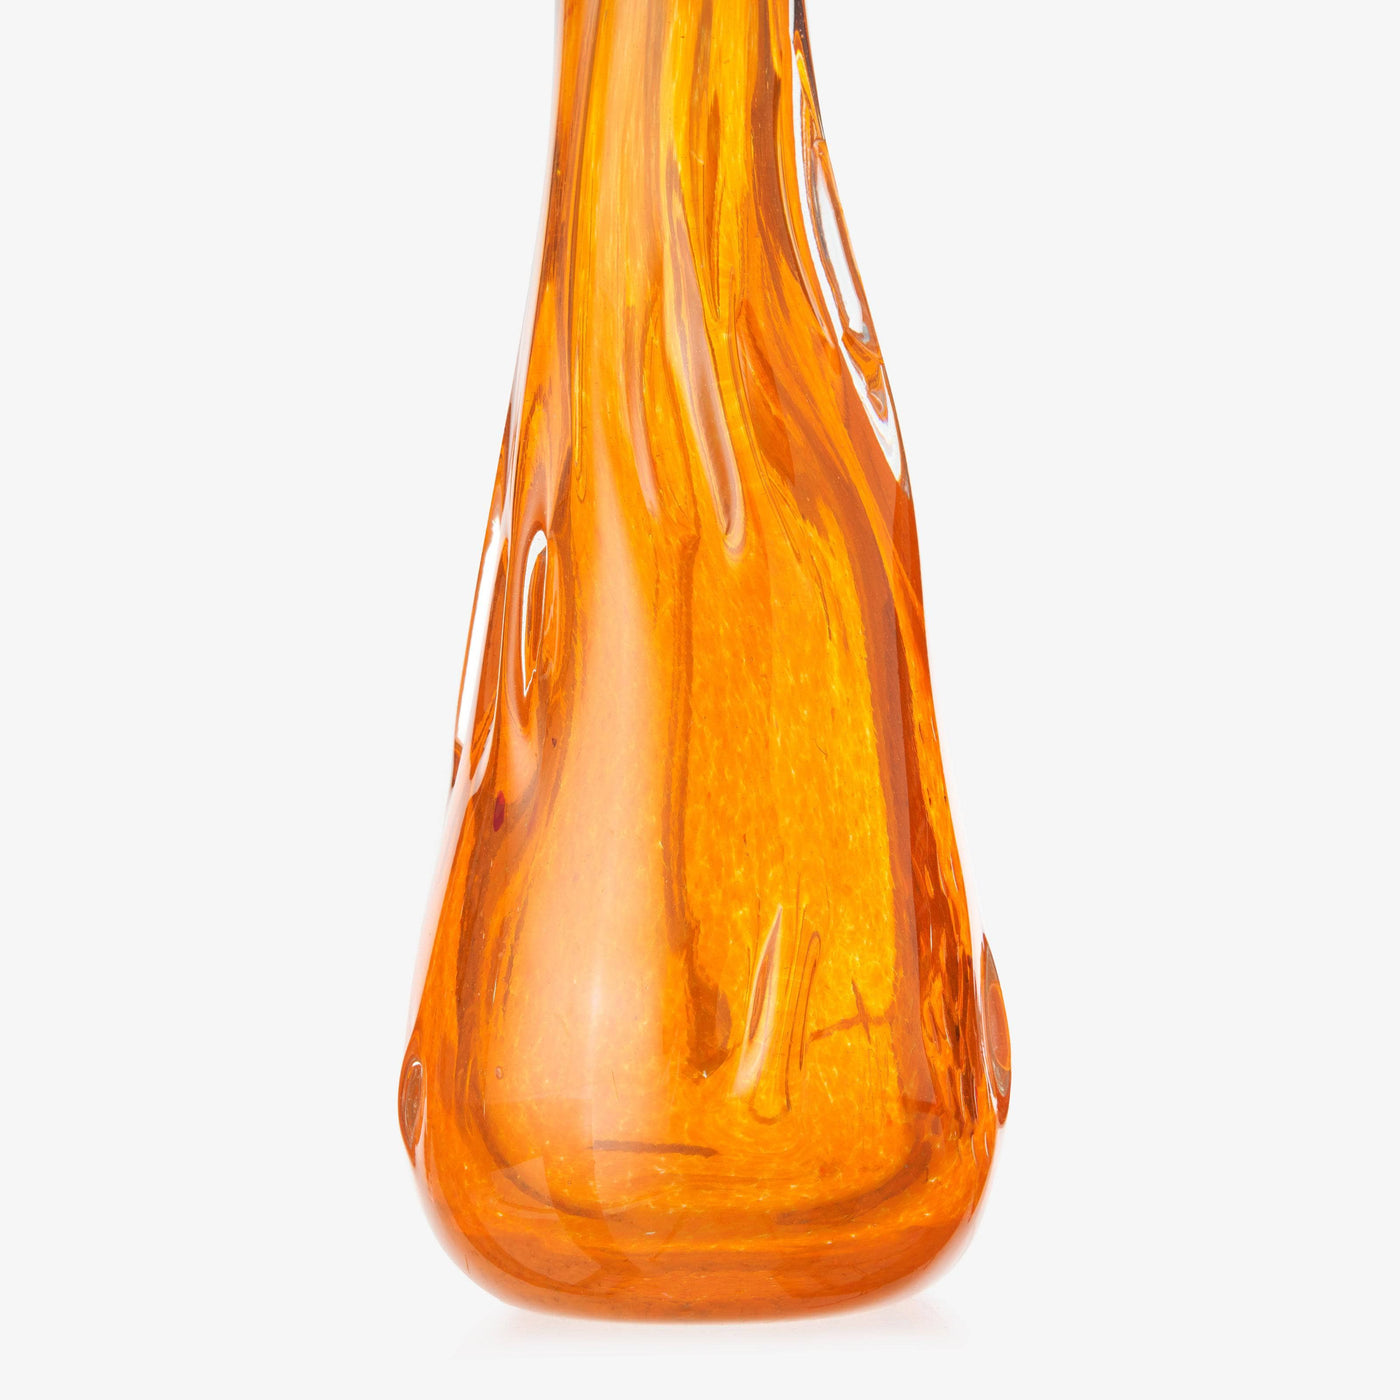 Denali Glass and Shade Table Lamp, Orange Table & Bedside Lamps sazy.com